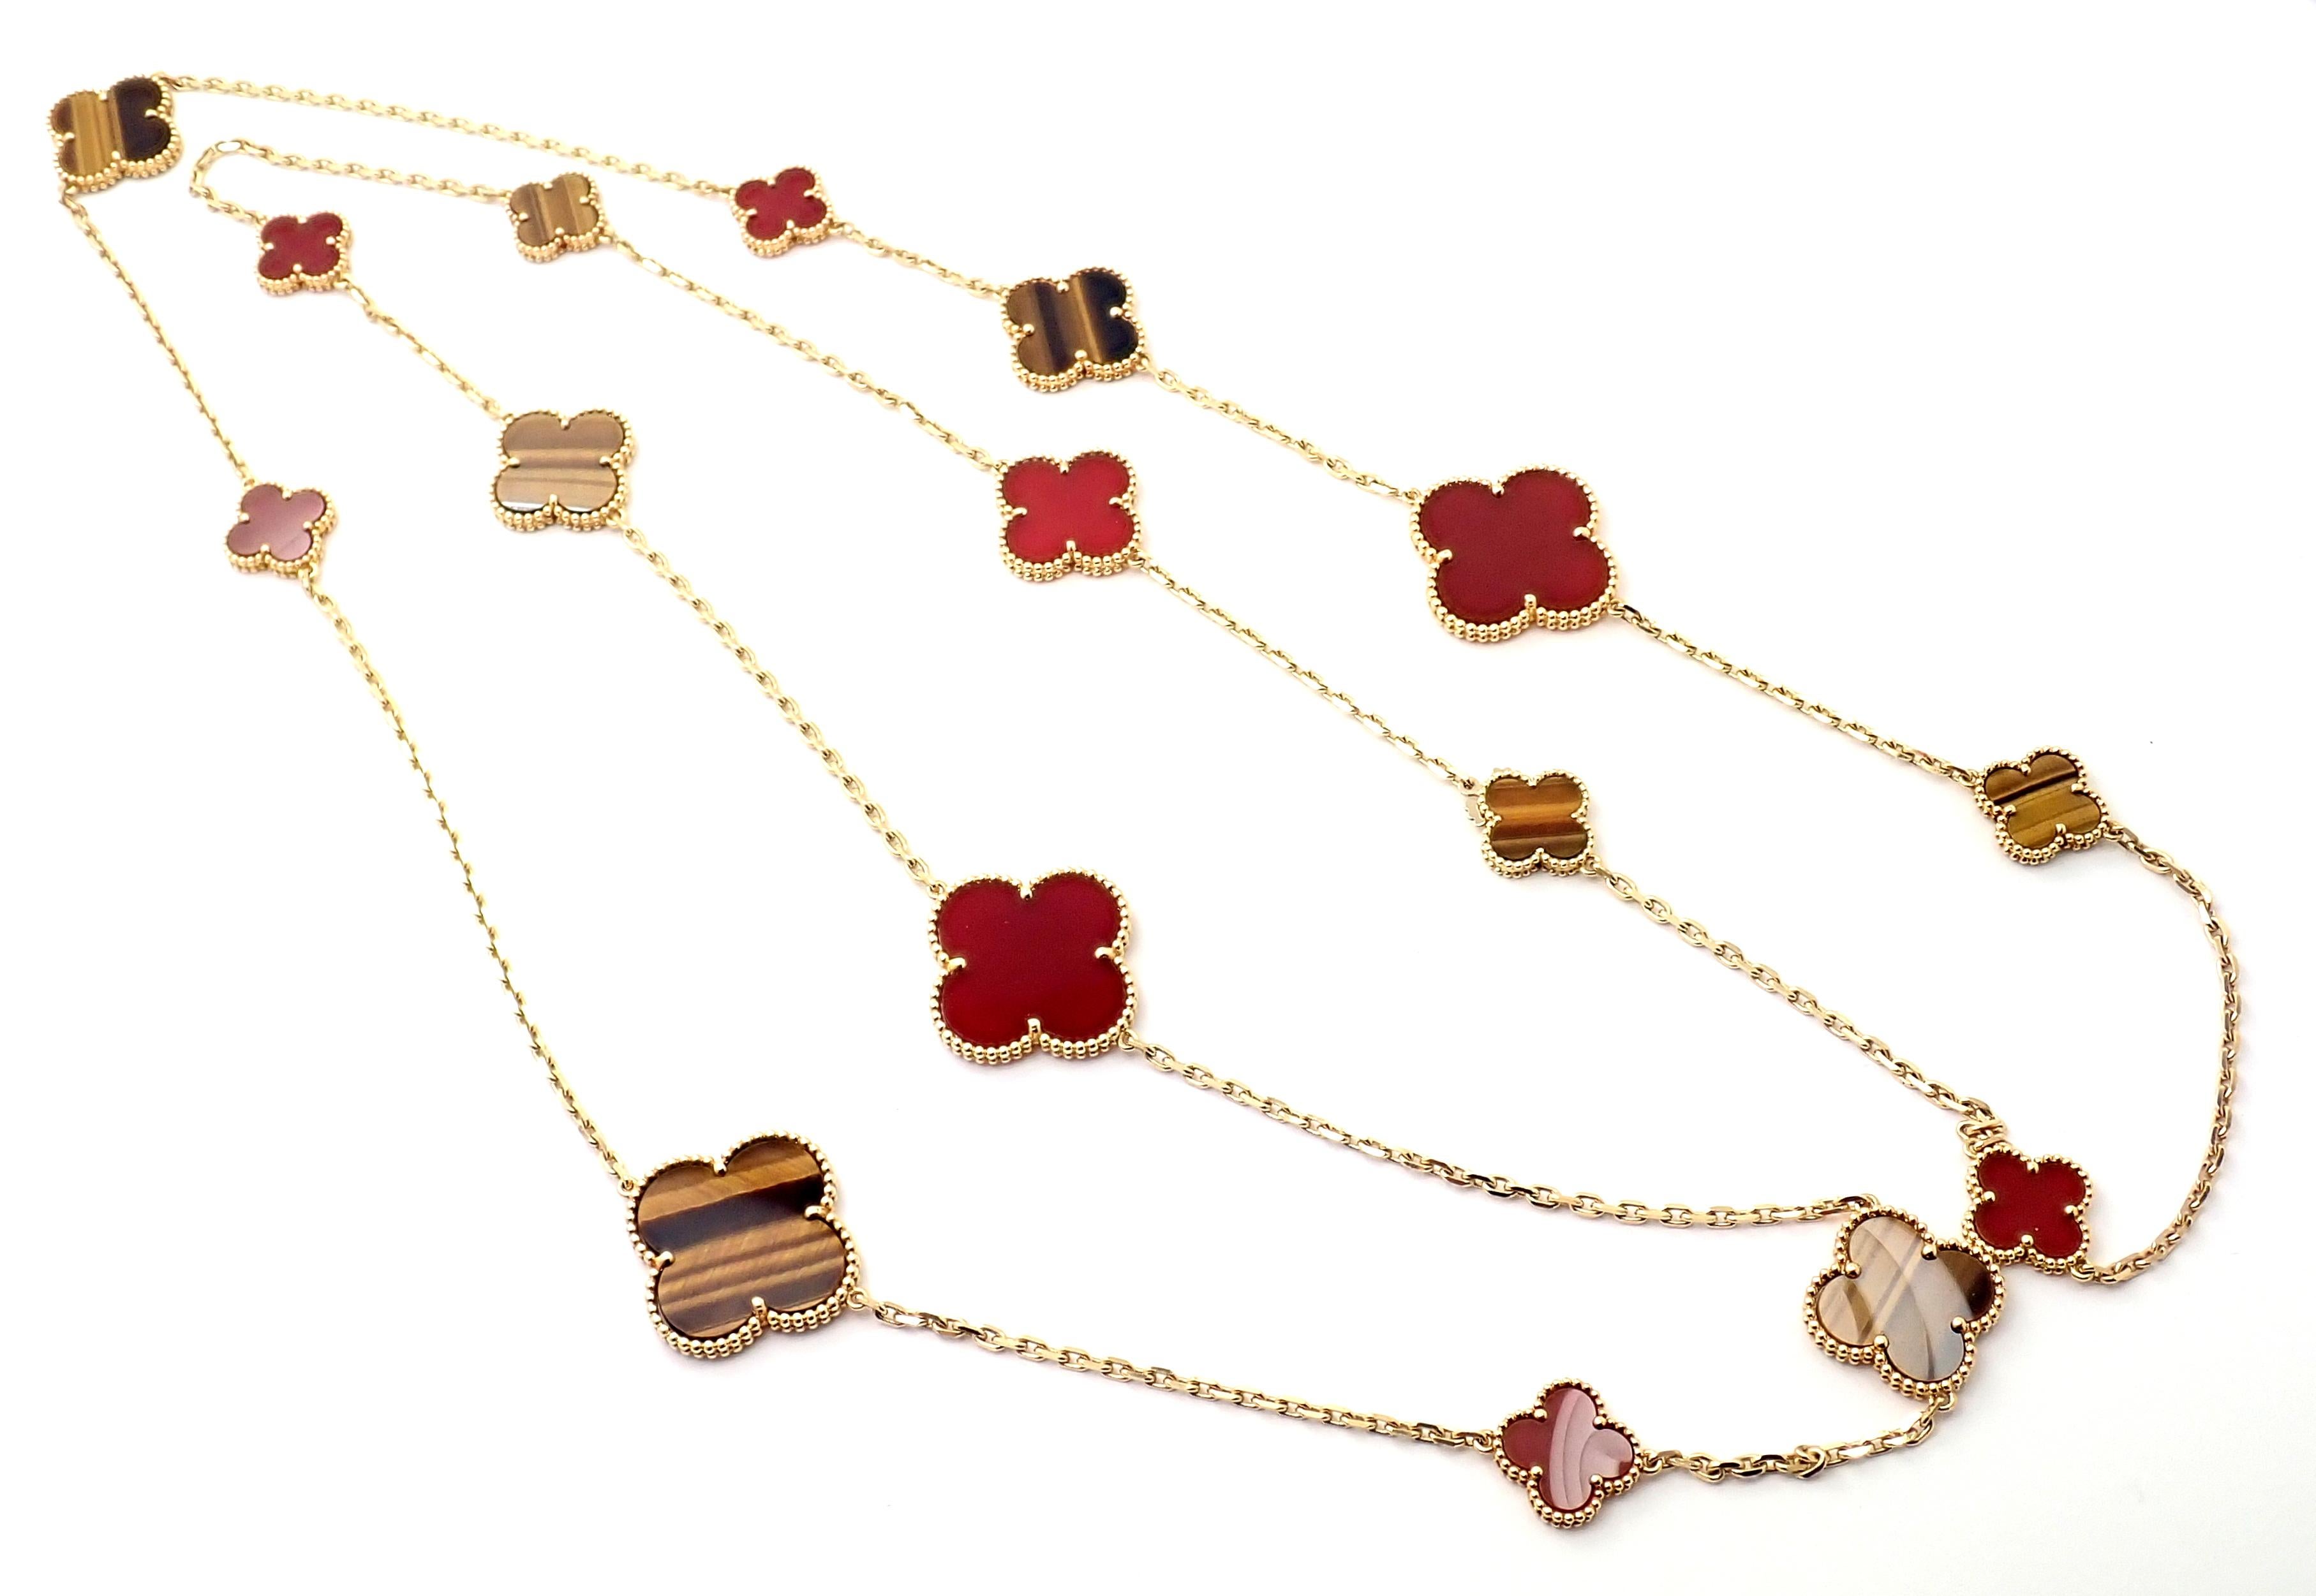 18k Yellow Gold Magic Alhambra sixteen motif necklace with carnelian and tiger's eye by Van Cleef Arpels. Numbered and signed by Van Cleef & Arpels. The Magic Alhambra collection introduces Van Cleef & Arpels' iconic motif in a variation of sizes,